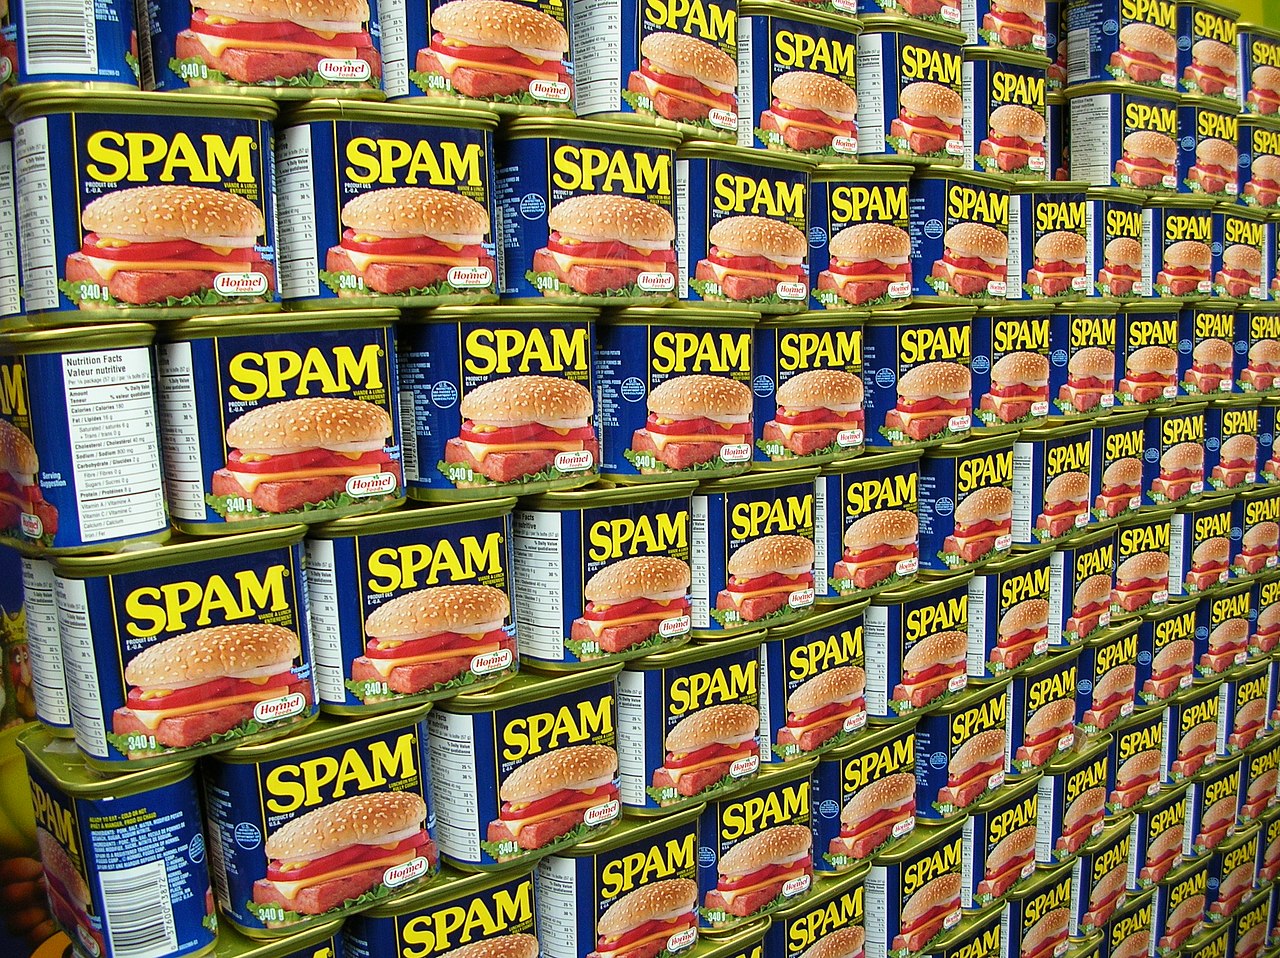 1280px-Spam_wall_-_Flickr_-_freezelight.jpg